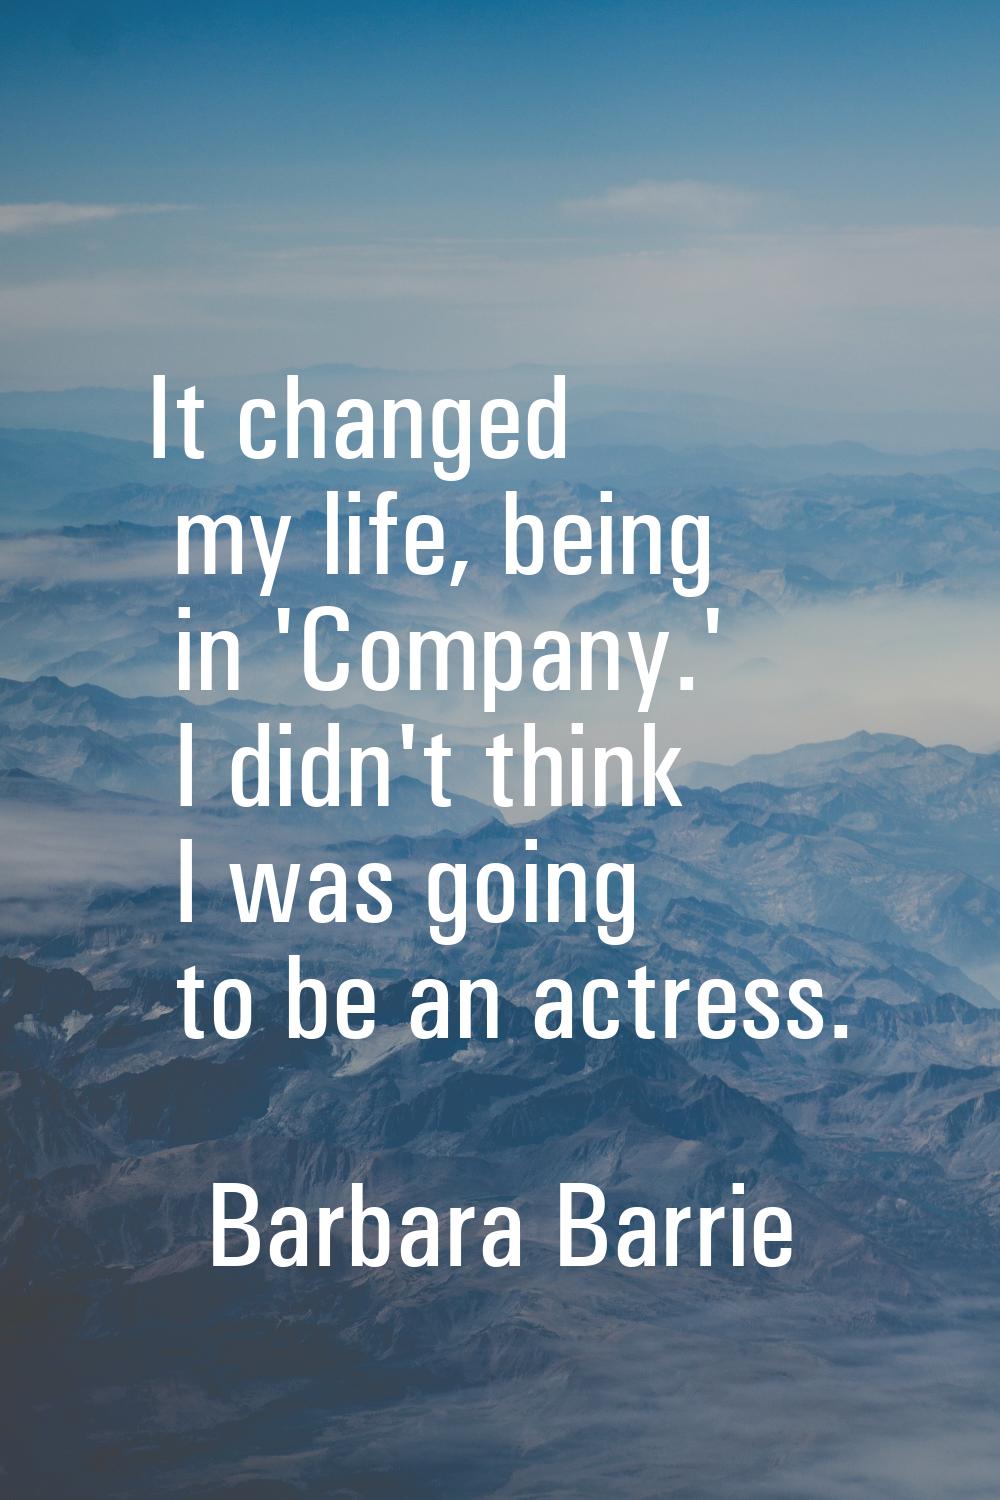 It changed my life, being in 'Company.' I didn't think I was going to be an actress.